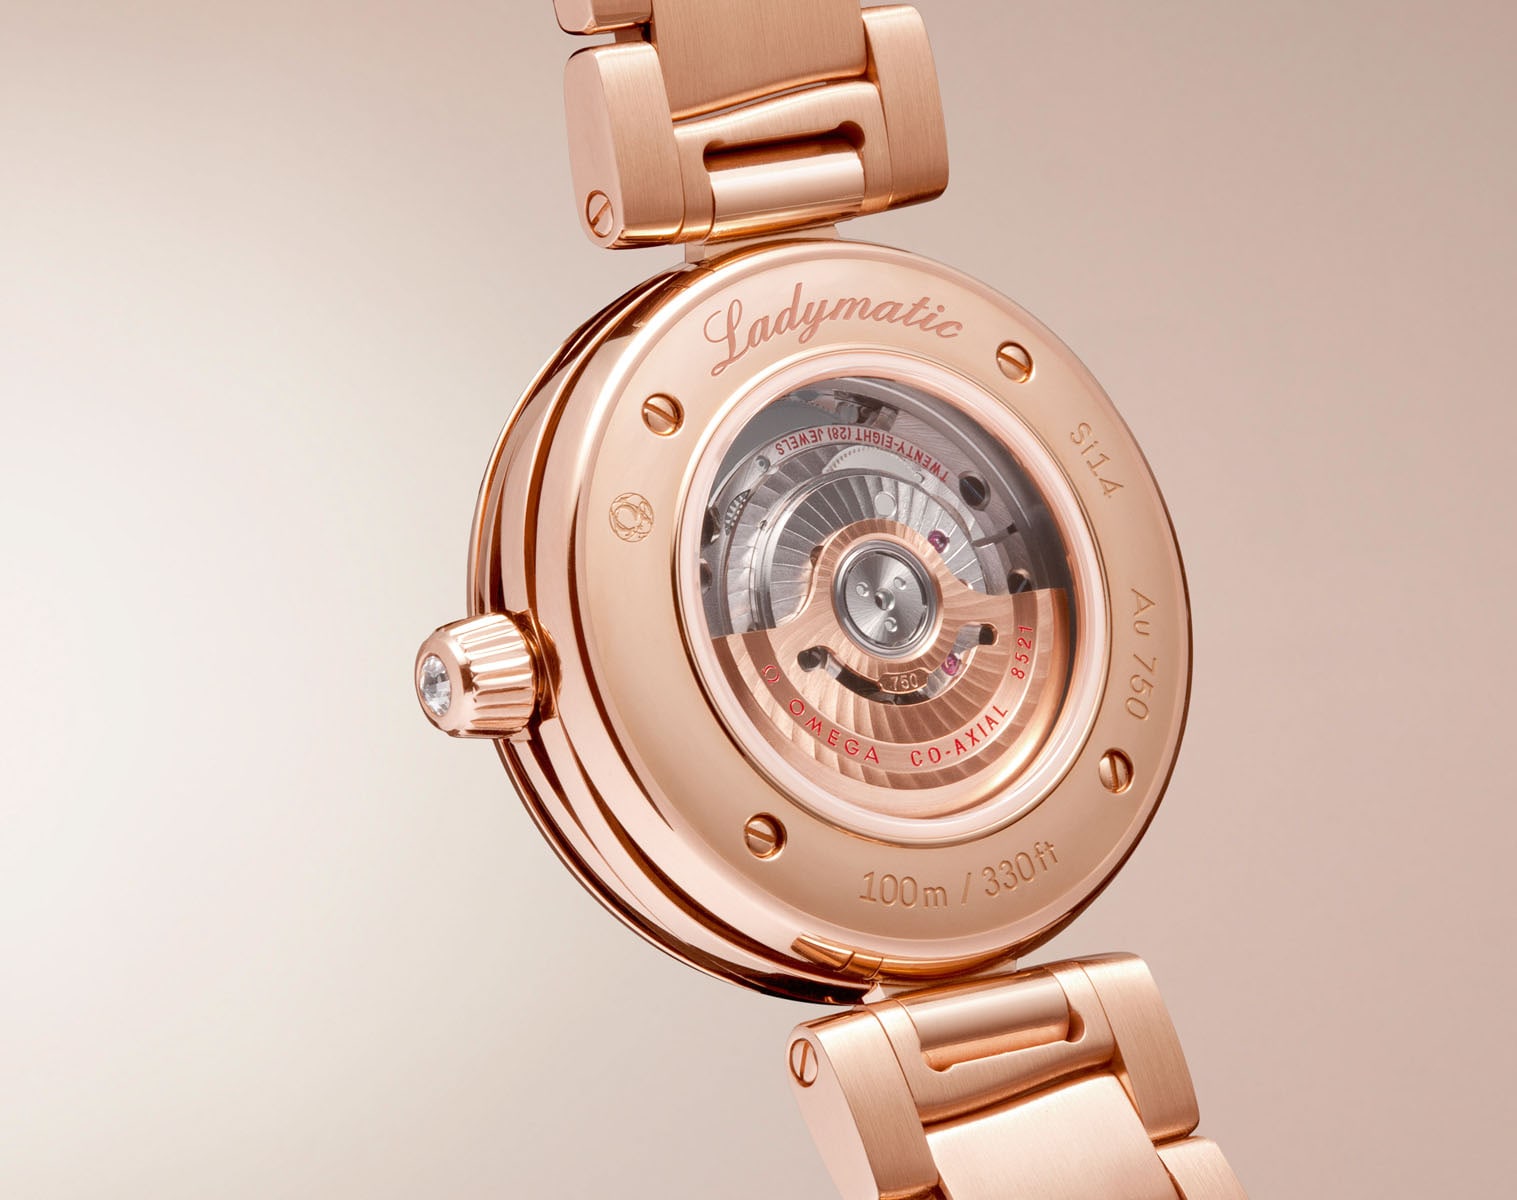 The transparent caseback of the Ladymatic ladies' watch